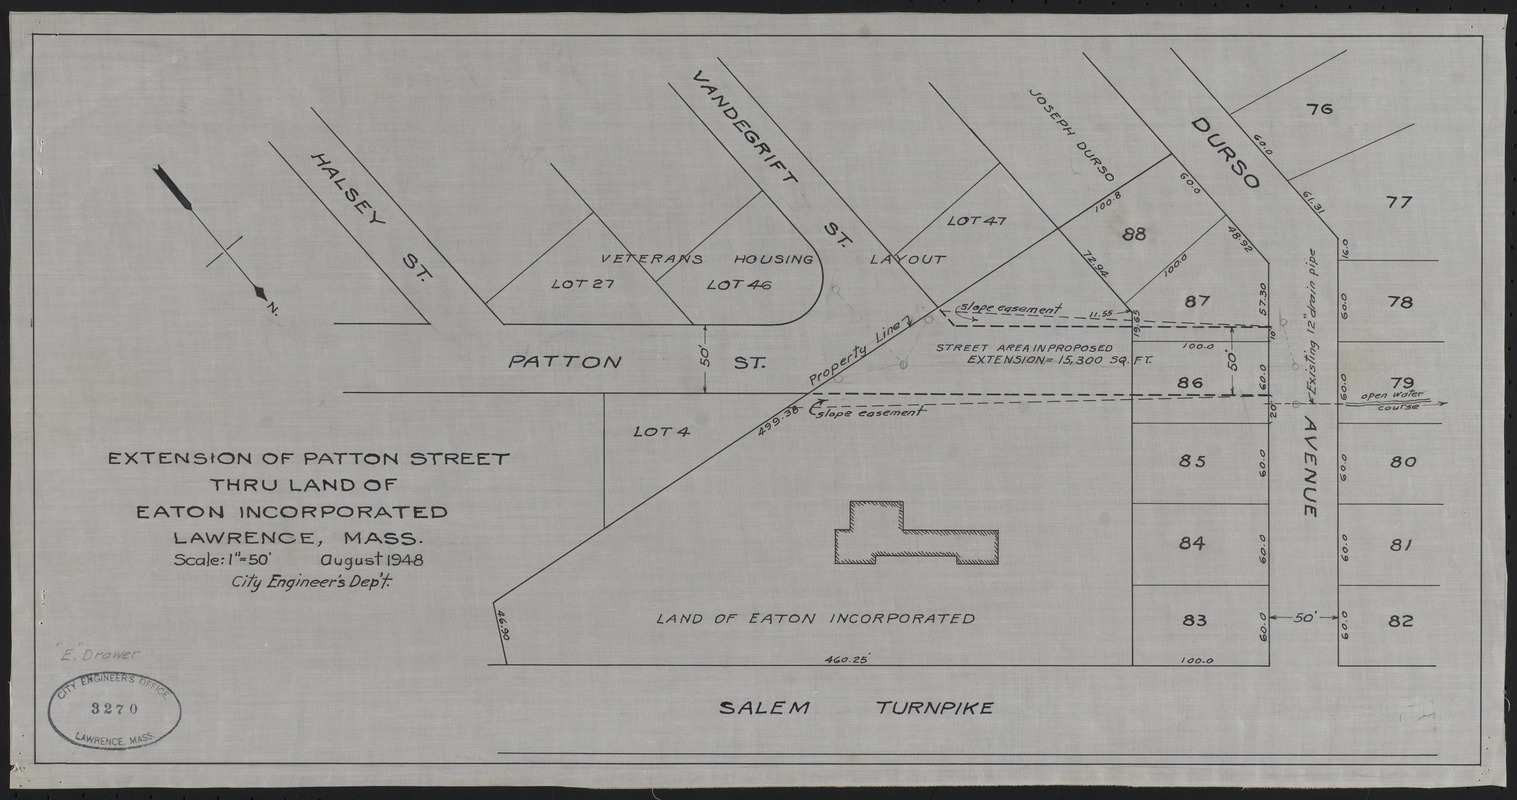 Extension of Patton Street thru land of Eaton Incorporated, Lawrence, Mass.